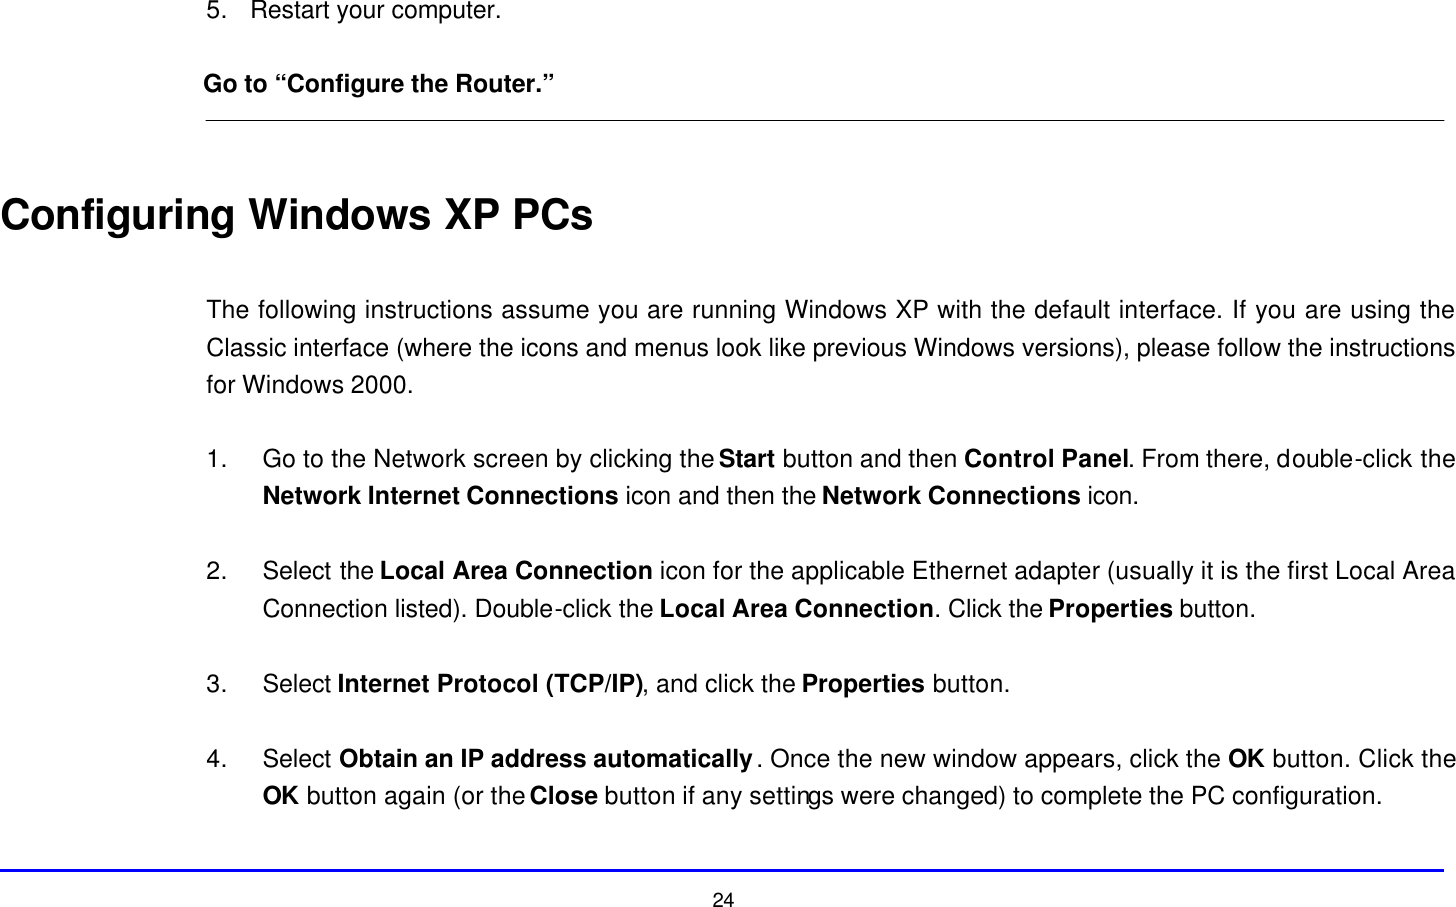  24 5. Restart your computer.  Go to “Configure the Router.”   Configuring Windows XP PCs  The following instructions assume you are running Windows XP with the default interface. If you are using the Classic interface (where the icons and menus look like previous Windows versions), please follow the instructions for Windows 2000.  1. Go to the Network screen by clicking the Start button and then Control Panel. From there, double-click the Network Internet Connections icon and then the Network Connections icon.  2. Select the Local Area Connection icon for the applicable Ethernet adapter (usually it is the first Local Area Connection listed). Double-click the Local Area Connection. Click the Properties button.  3. Select Internet Protocol (TCP/IP), and click the Properties button.  4. Select Obtain an IP address automatically. Once the new window appears, click the OK button. Click the OK button again (or the Close button if any settings were changed) to complete the PC configuration.  